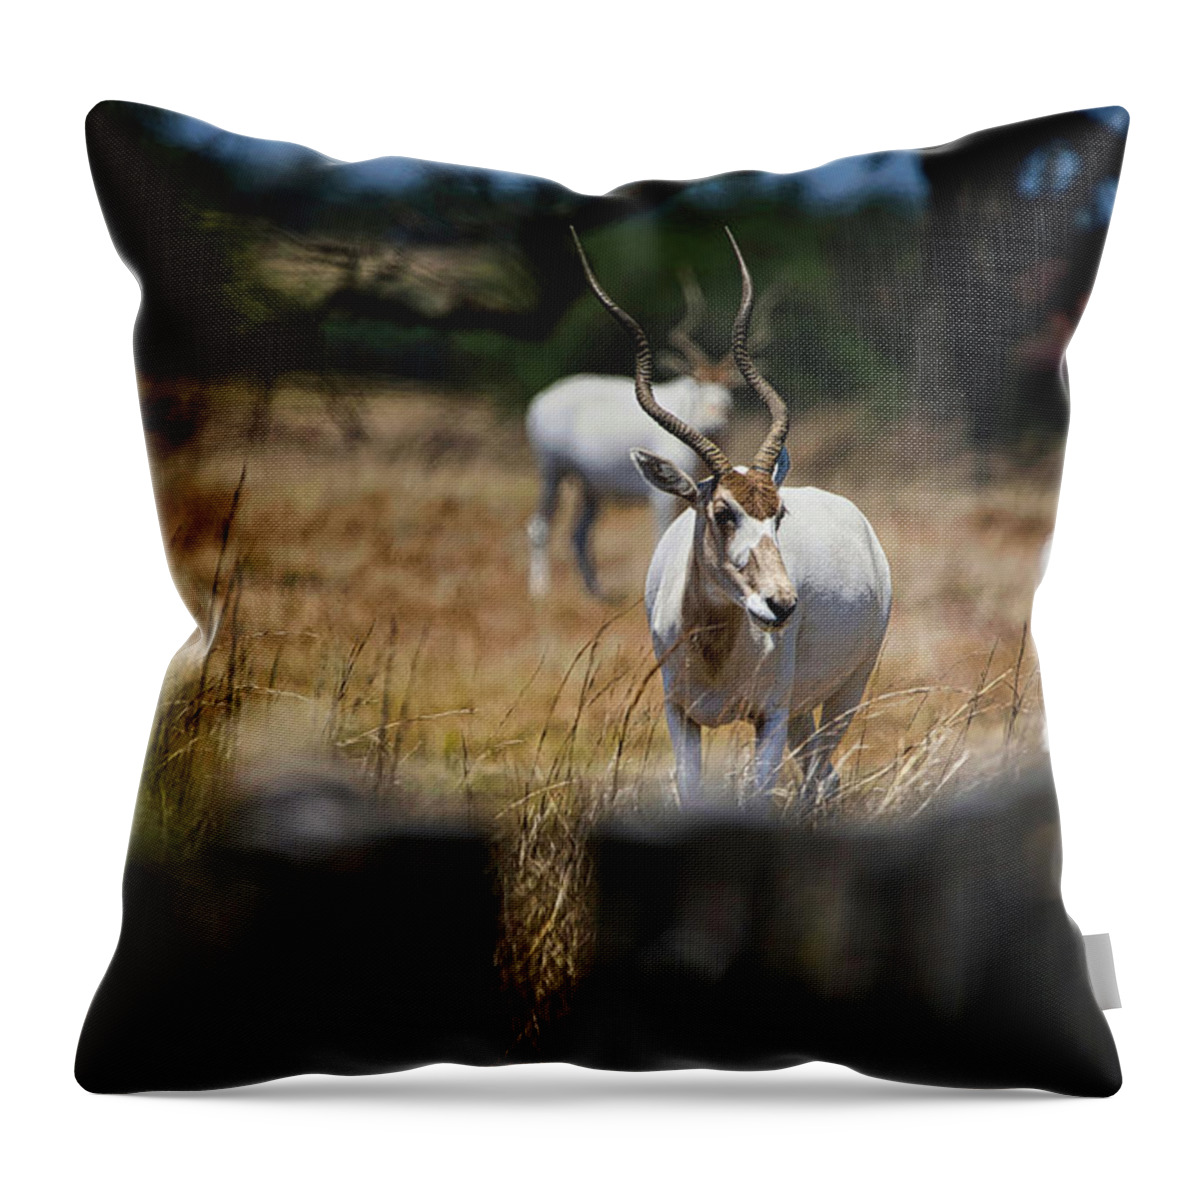 Addax Throw Pillow featuring the photograph Addax Antelope by Rene Vasquez